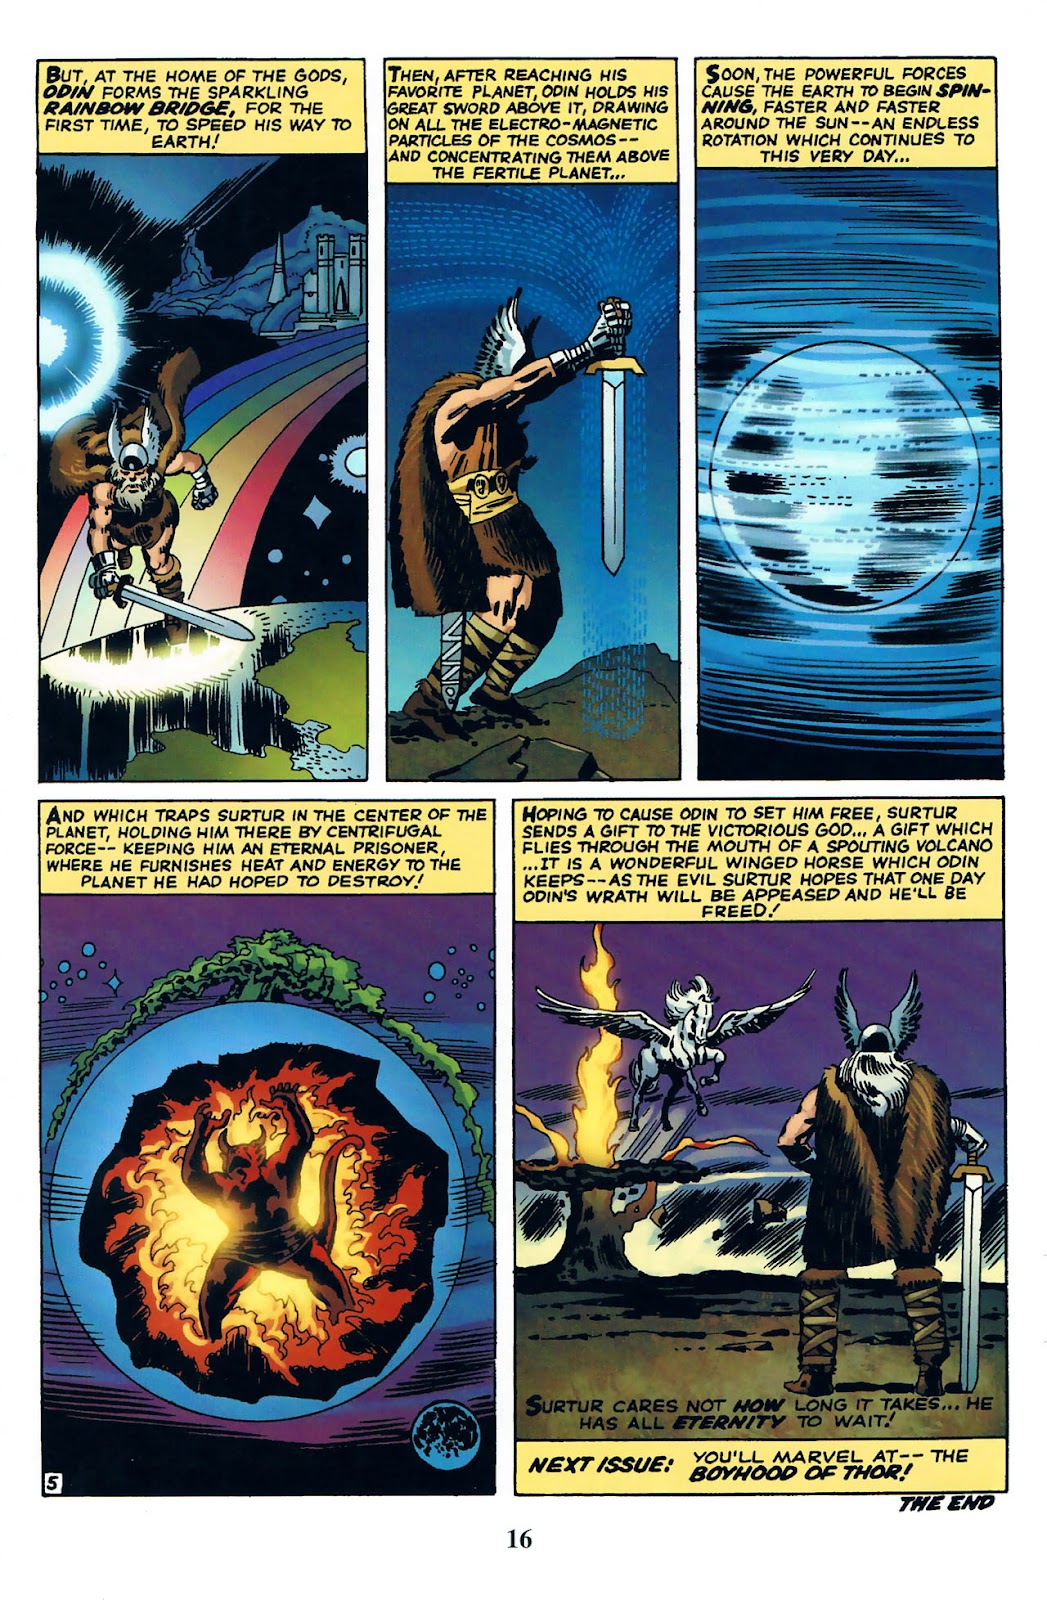 Thor: Tales of Asgard by Stan Lee & Jack Kirby issue 1 - Page 18